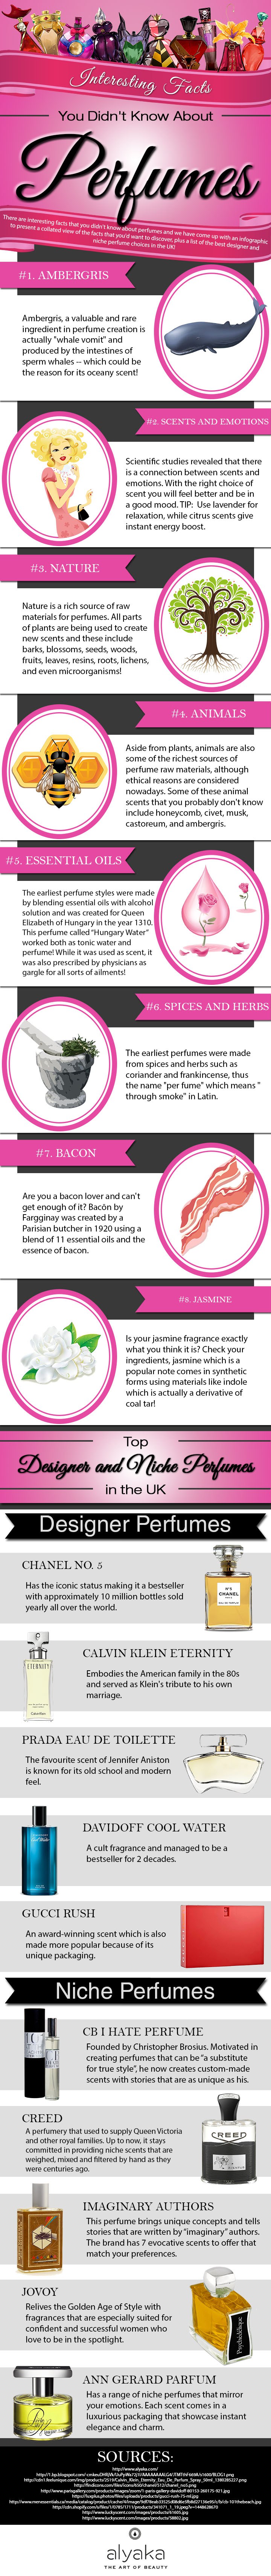 8 Interesting Facts About Perfumes infographic